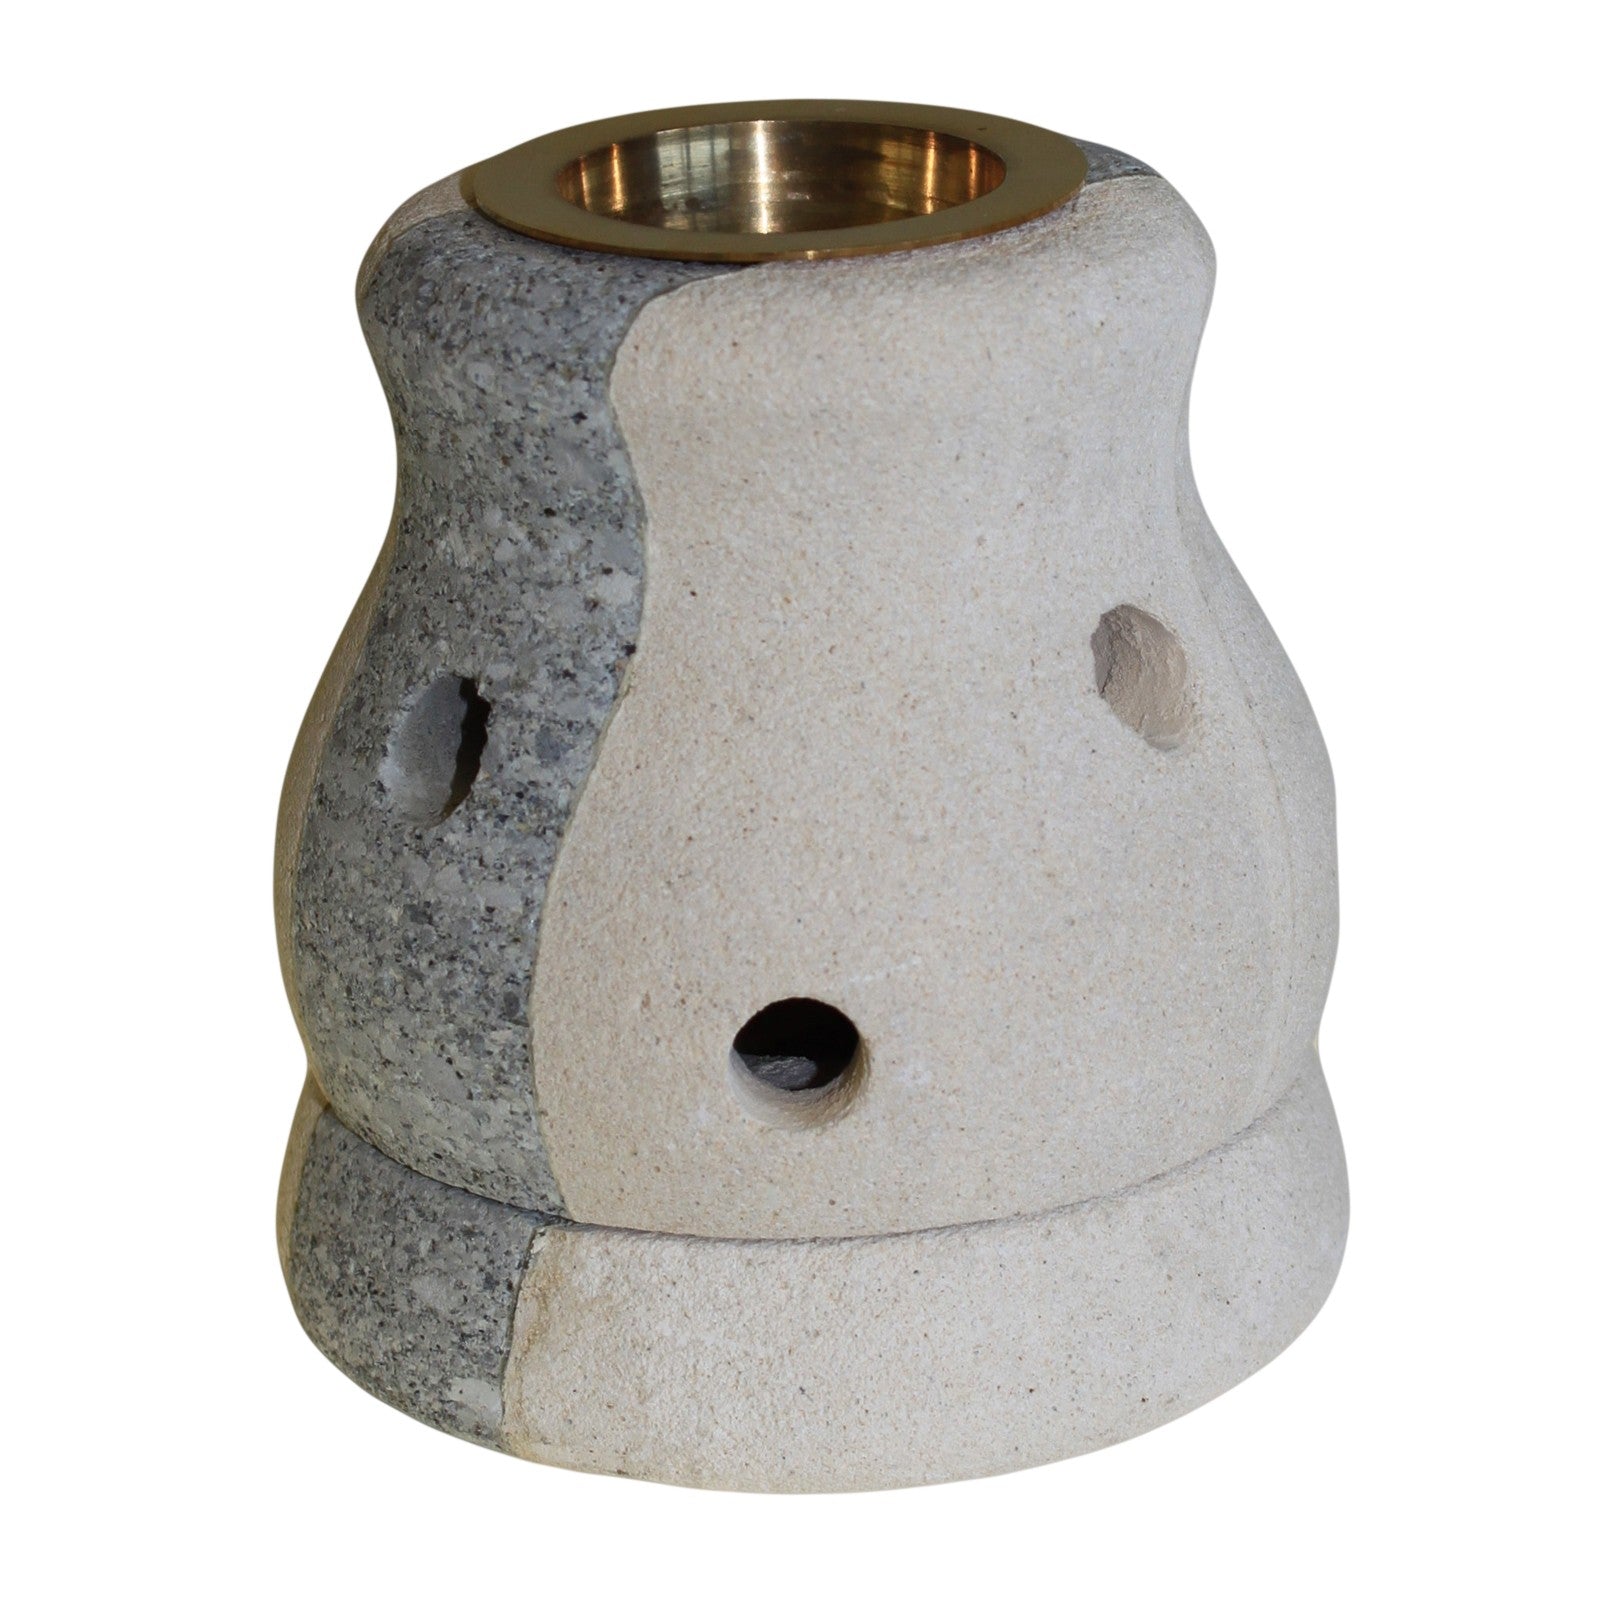 View Stone Oil Burner Combo Shaped information